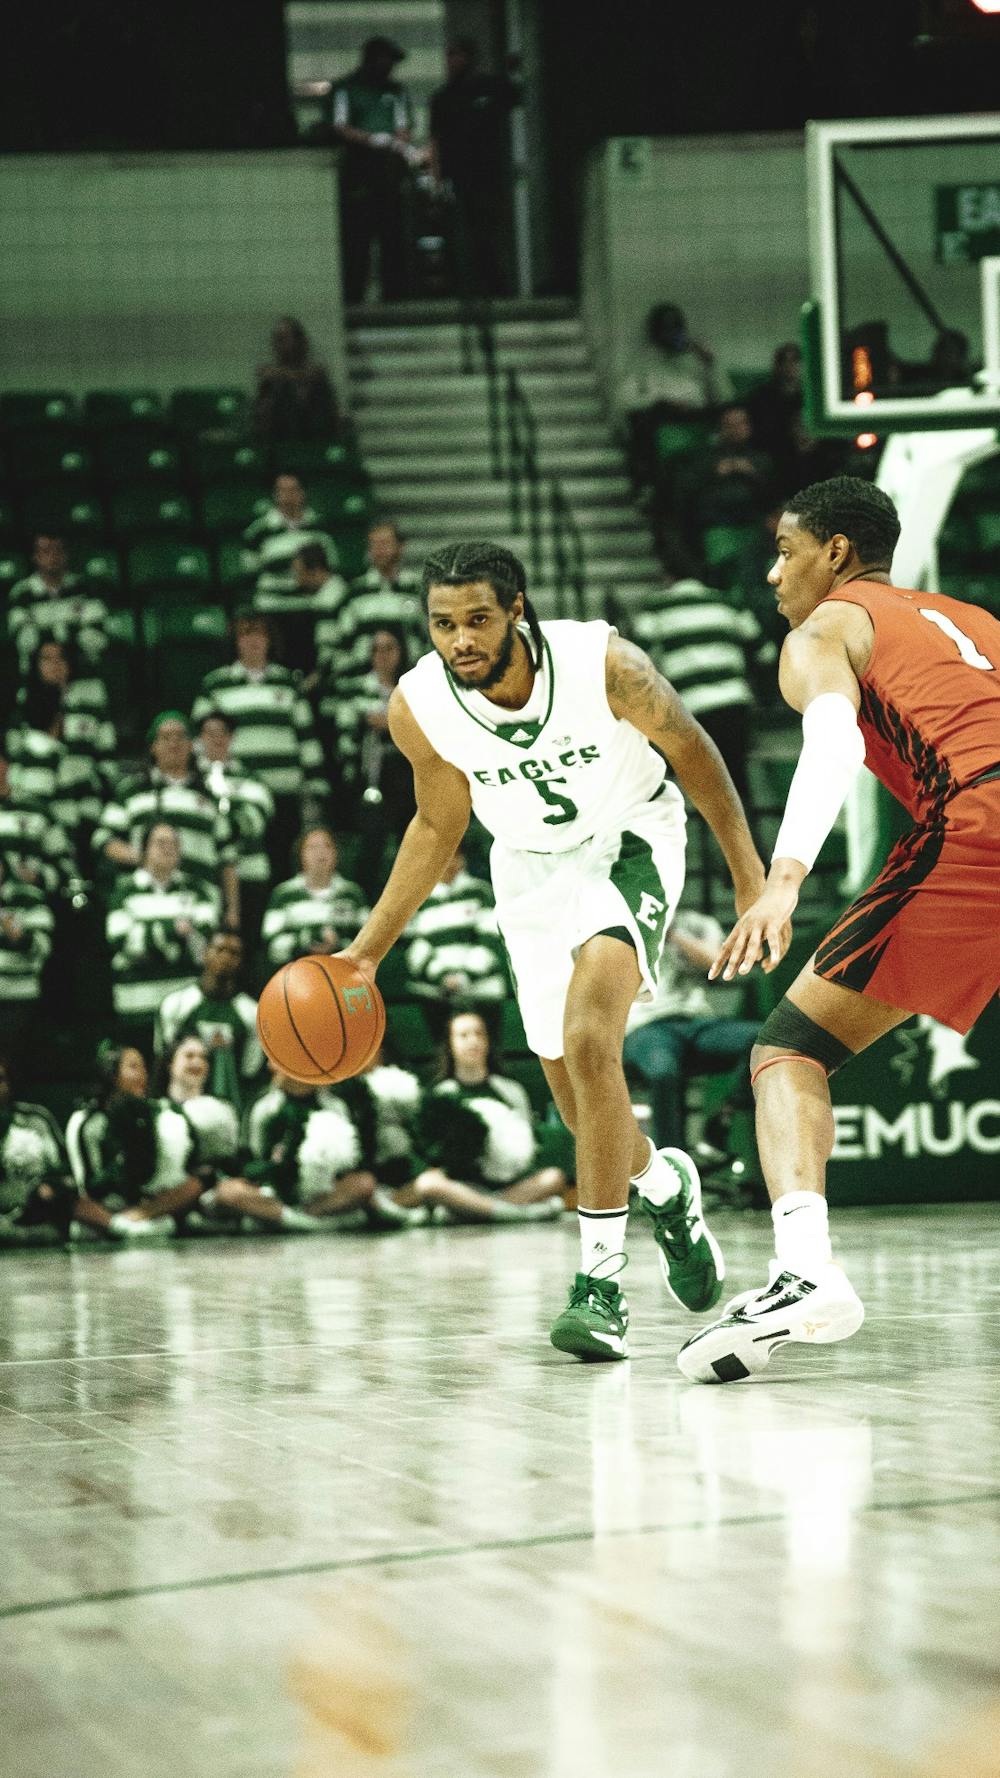 Eastern Michigan hoops improves to 3-0 at home after defeat over Lake Superior State, 68-53